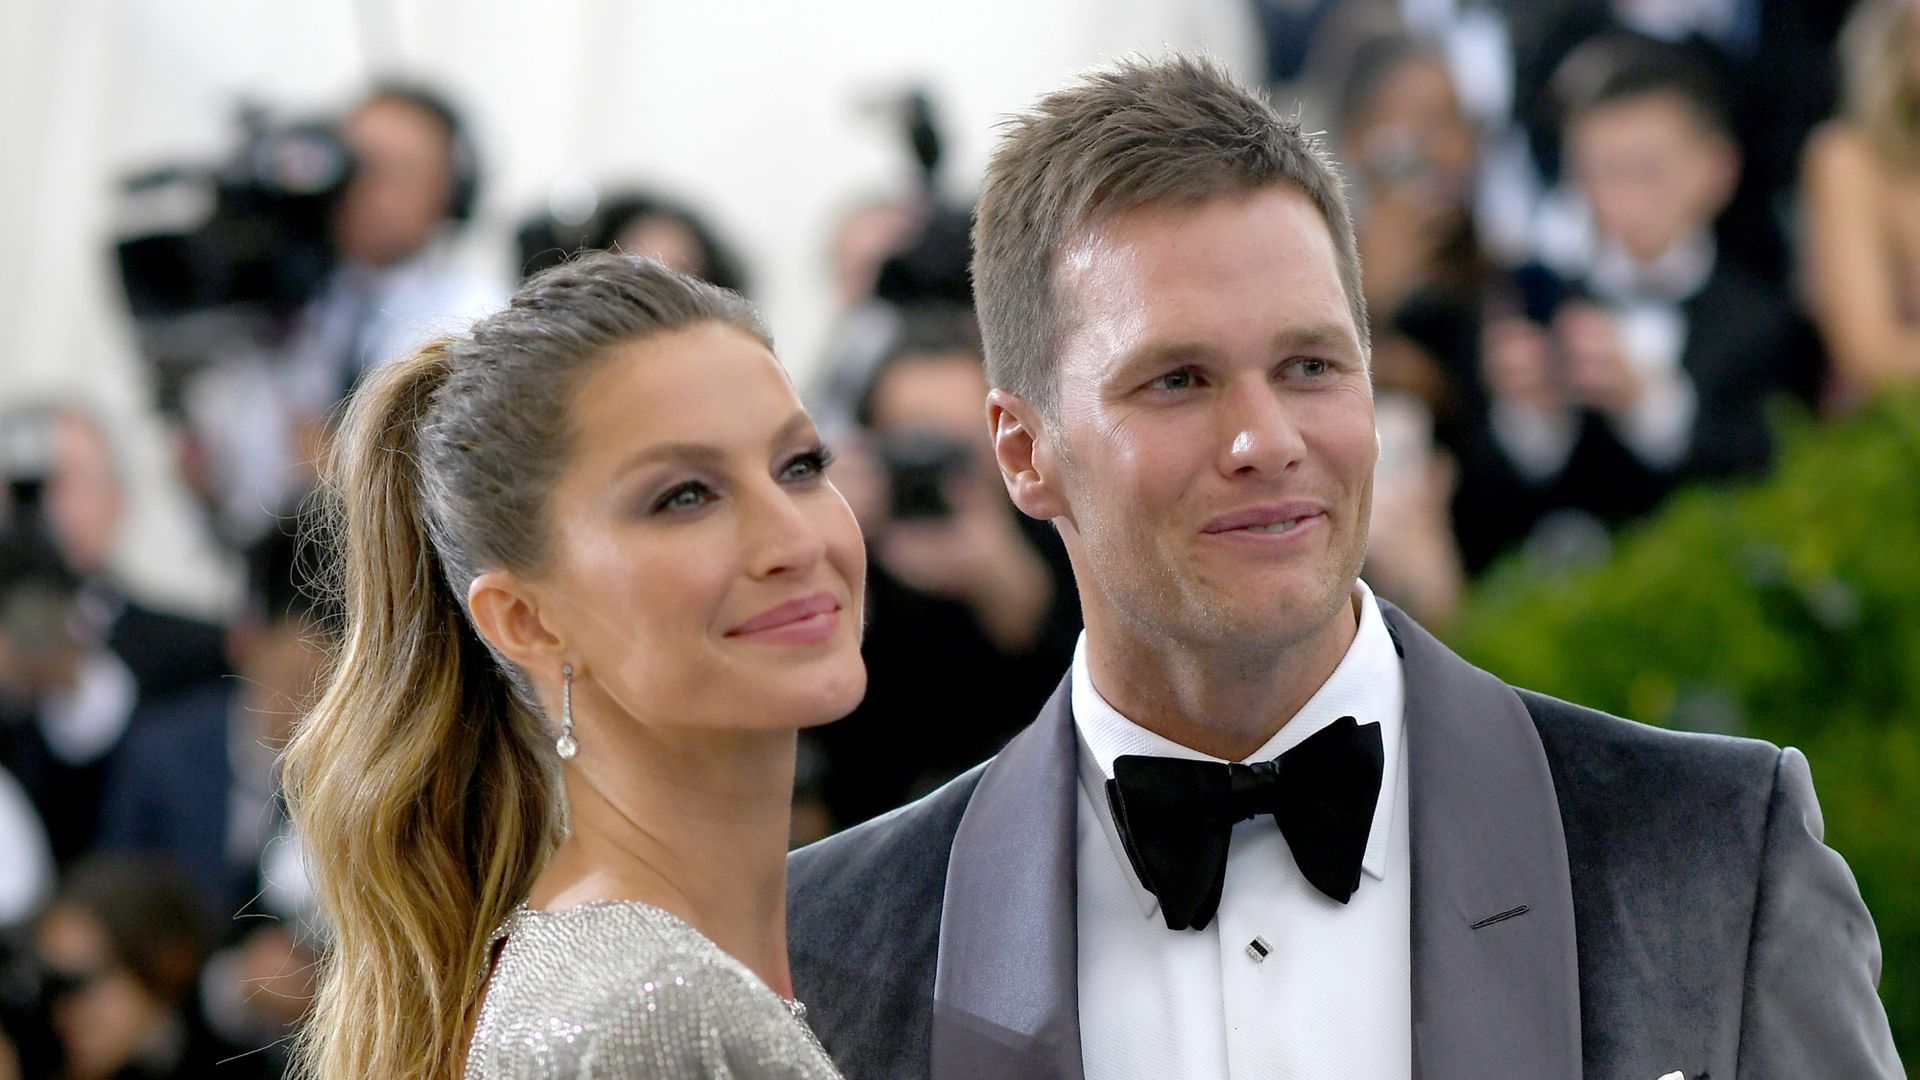 Gisele Bundchen and Tom Brady attend the "Rei Kawakubo/Comme des Garcons: Art Of The In-Between" Costume Institute Gala